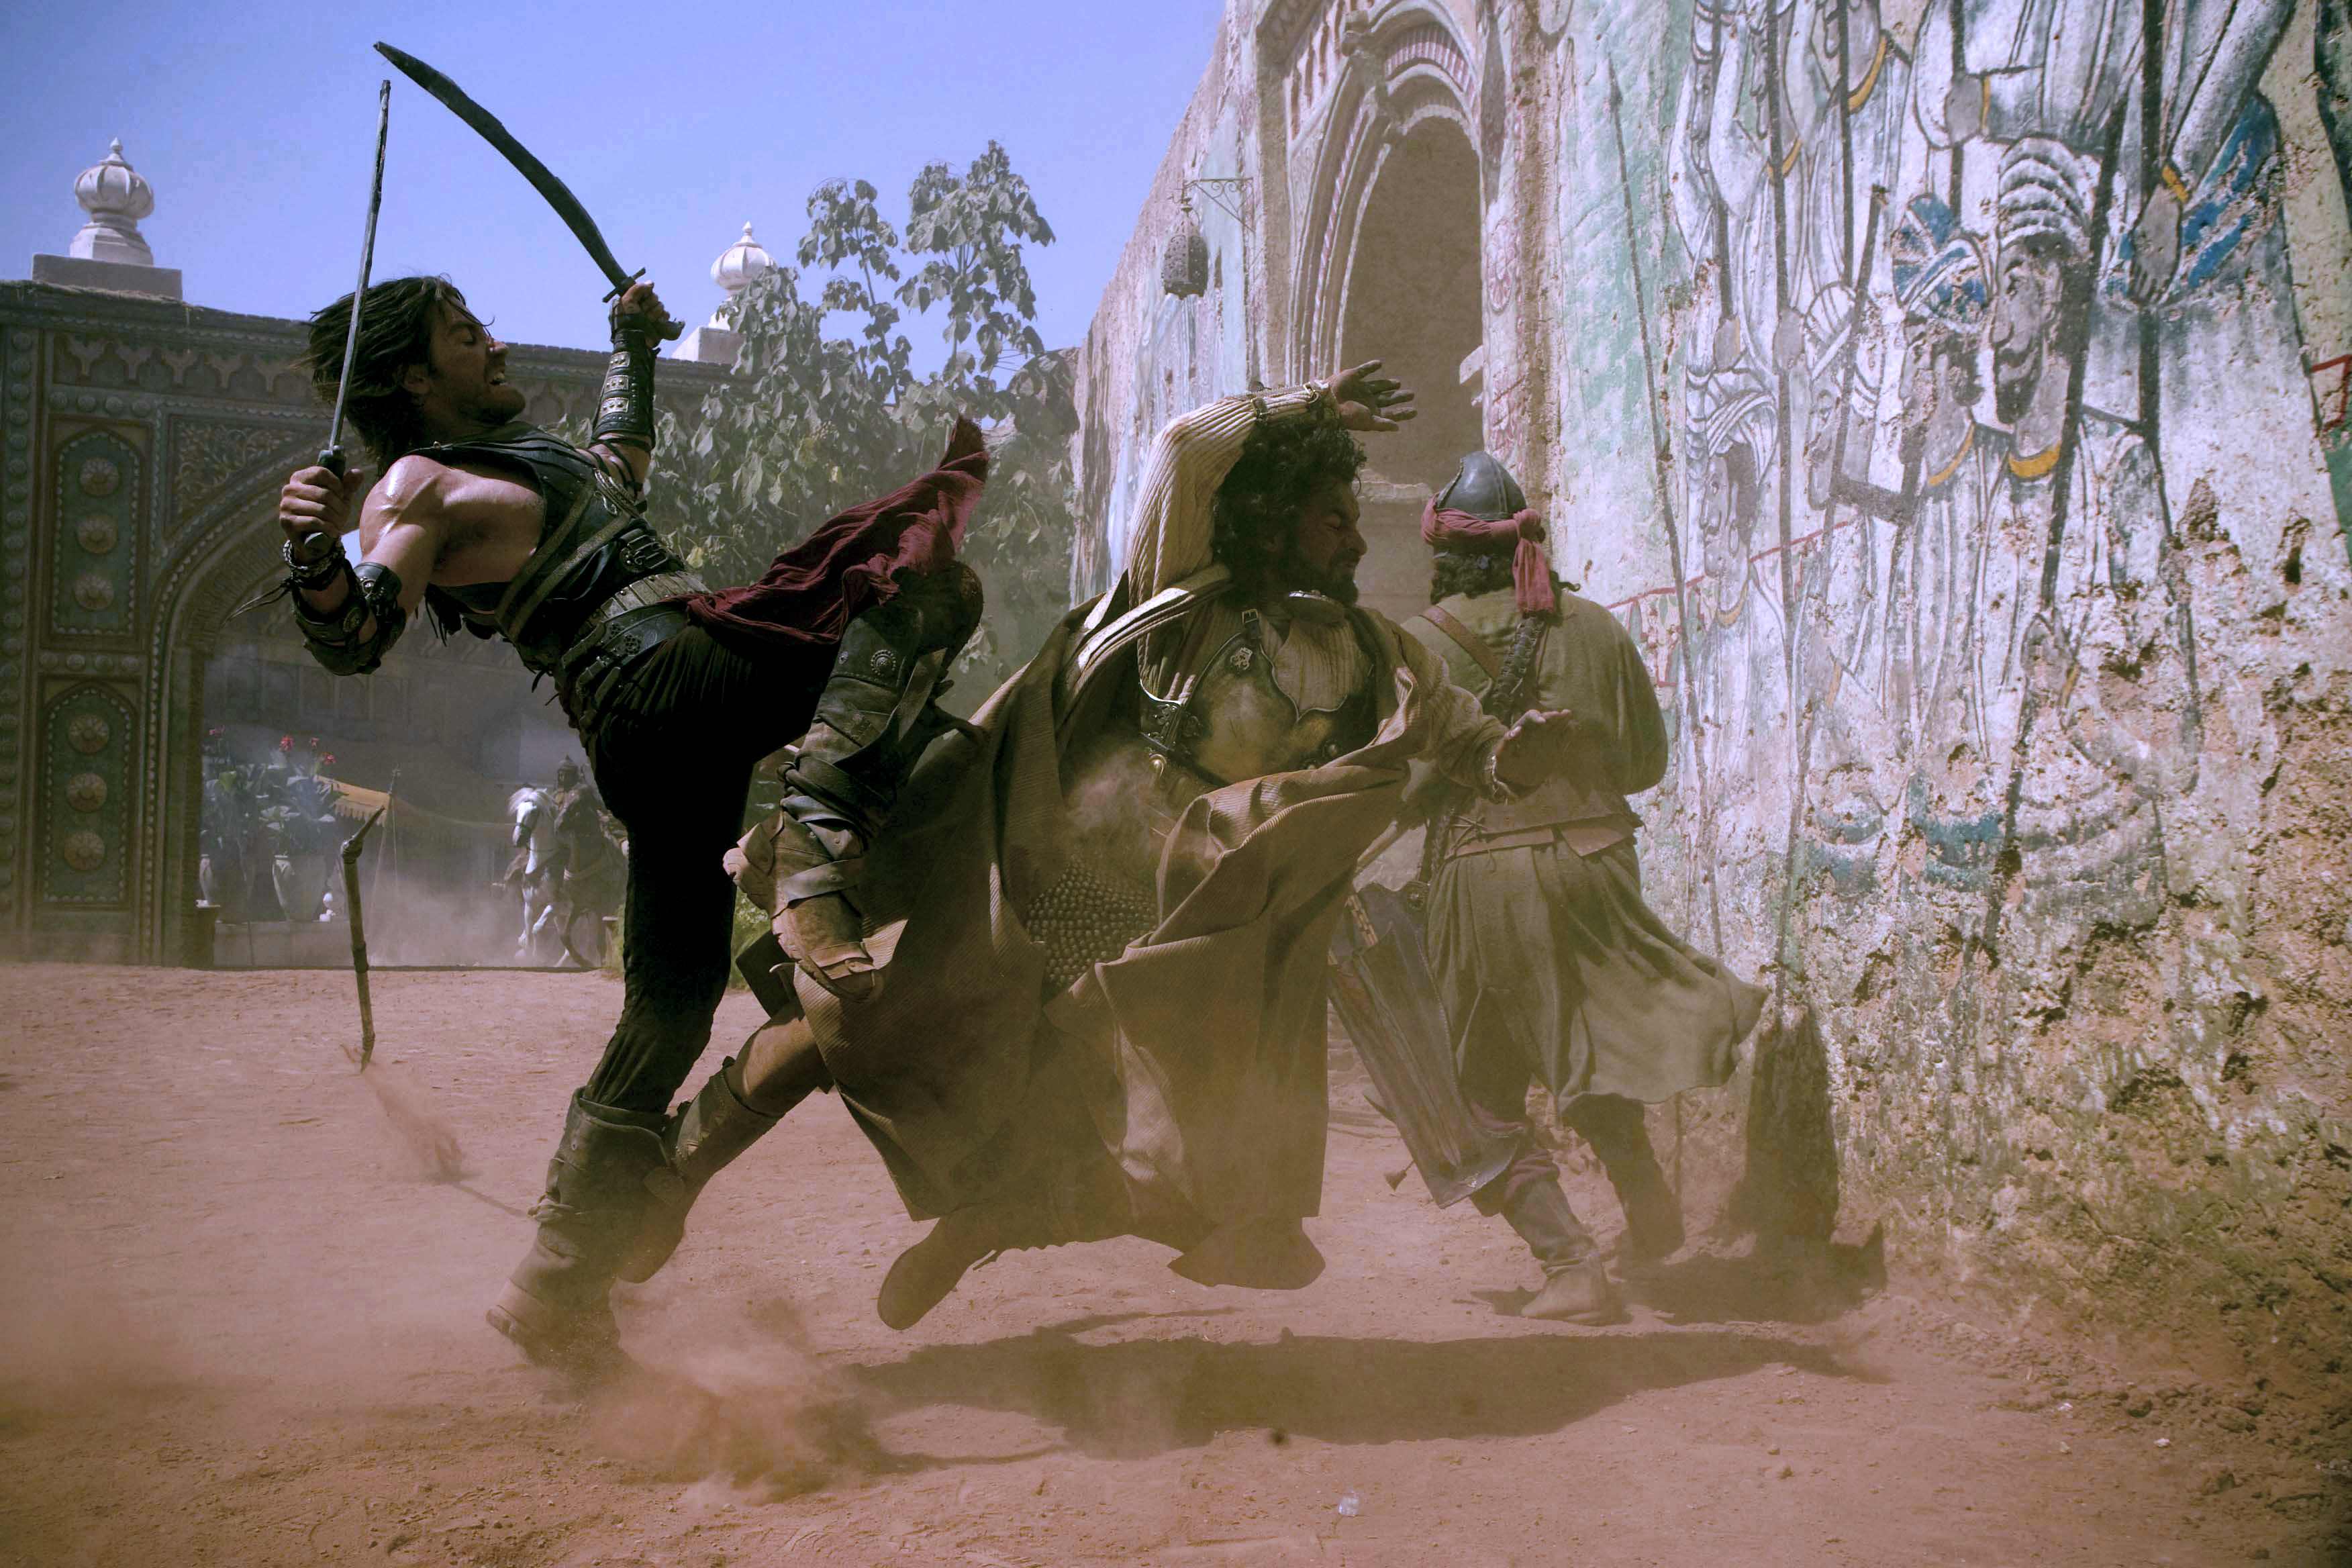 Dastan and Asoka fight for the dagger